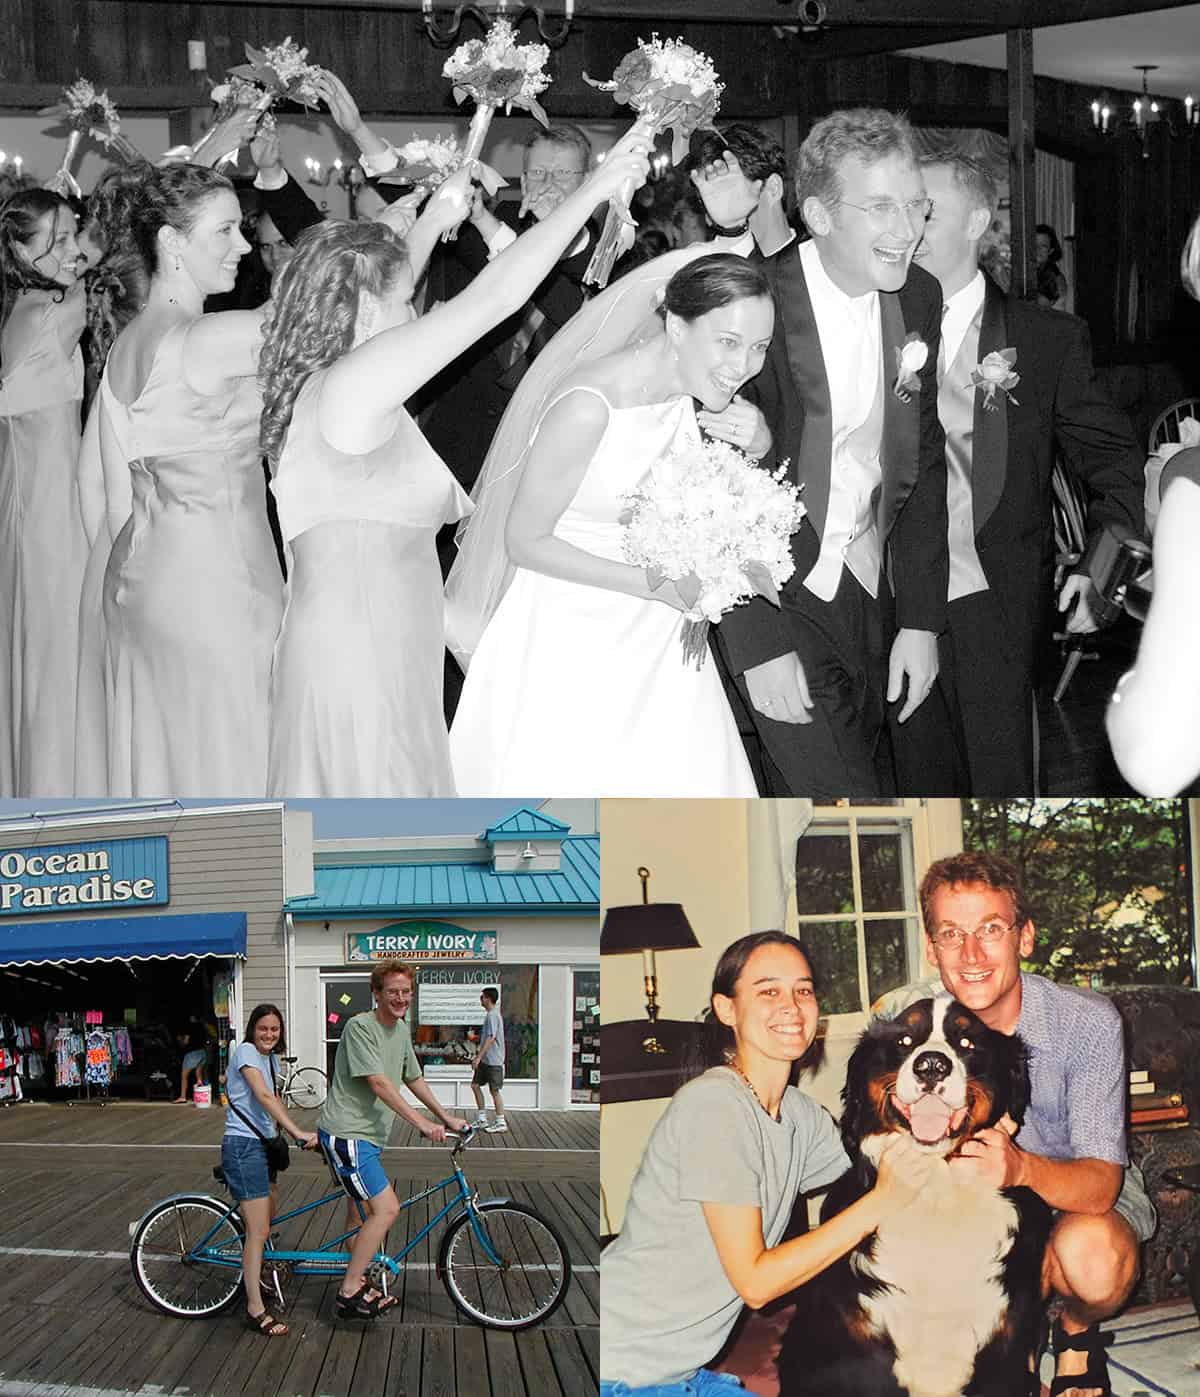 Three photos of the same couple: their wedding; riding a tandem bike; and posing with a dog